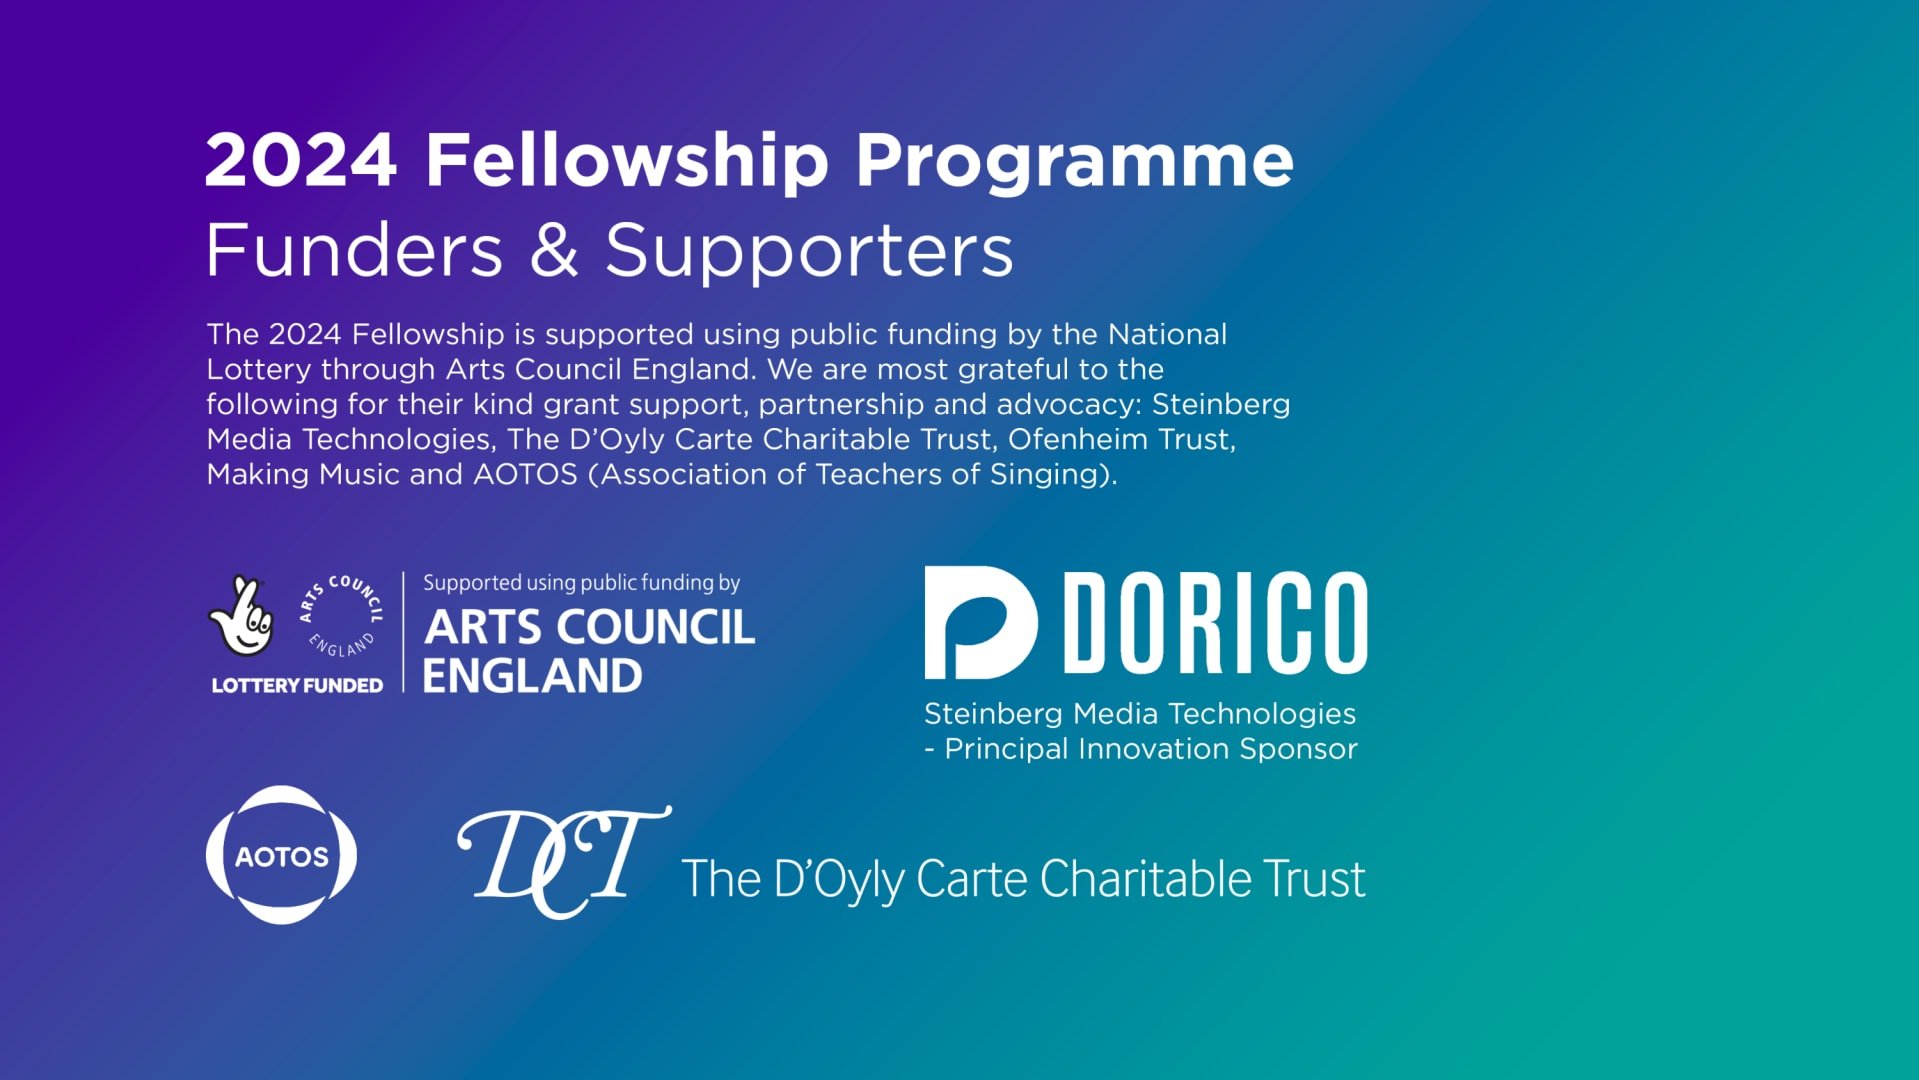 Acknowledgement of the supporters of the 2024 Fellowship scheme with logos for the Arts Council, Dorico, the D'Oyly Carte Charitable Trust and AOTOS